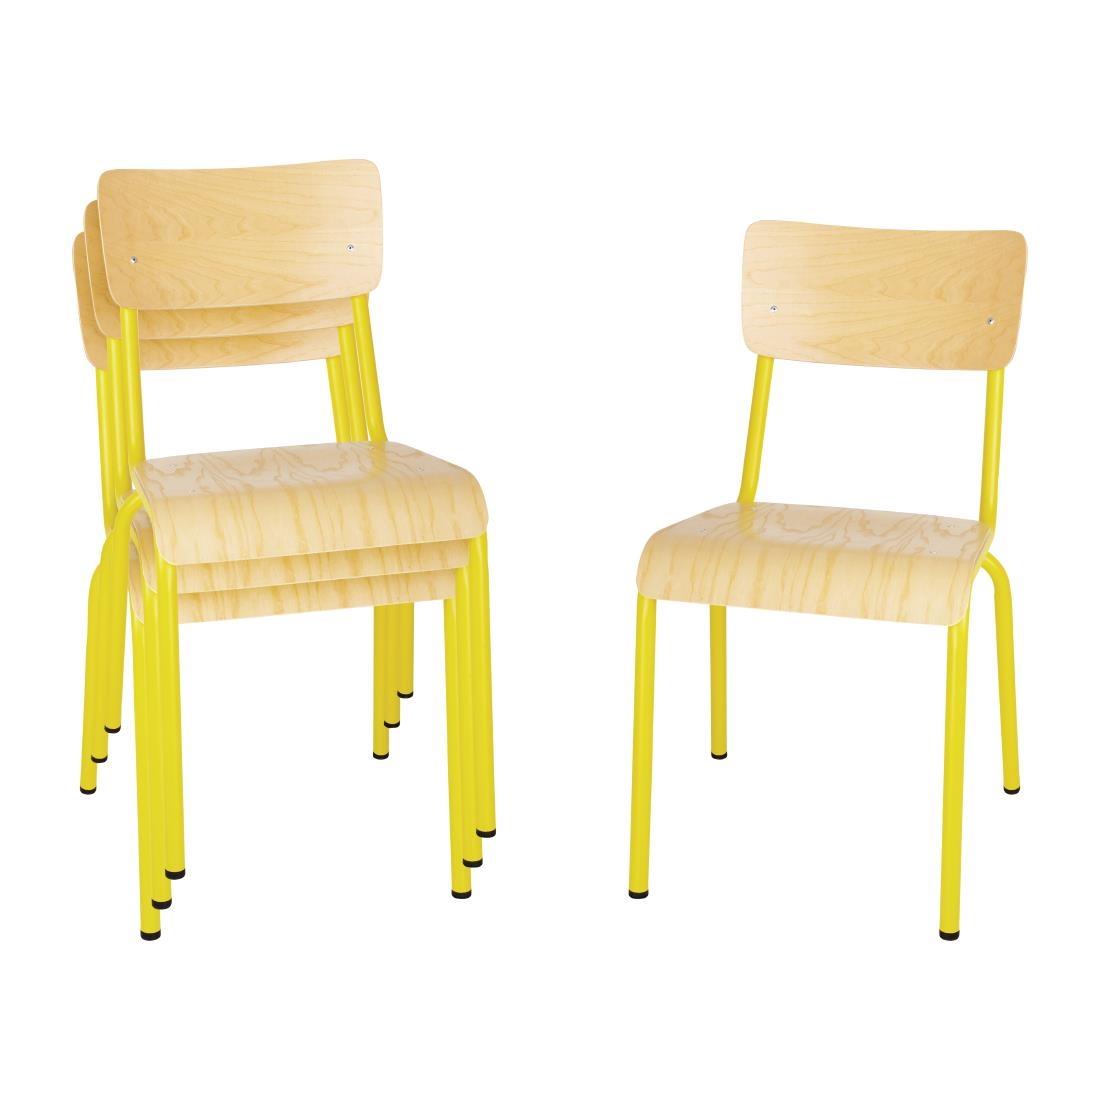 Bolero Cantina Side Chairs with Wooden Seat Pad and Backrest Yellow (Pack of 4) - FB948  - 6